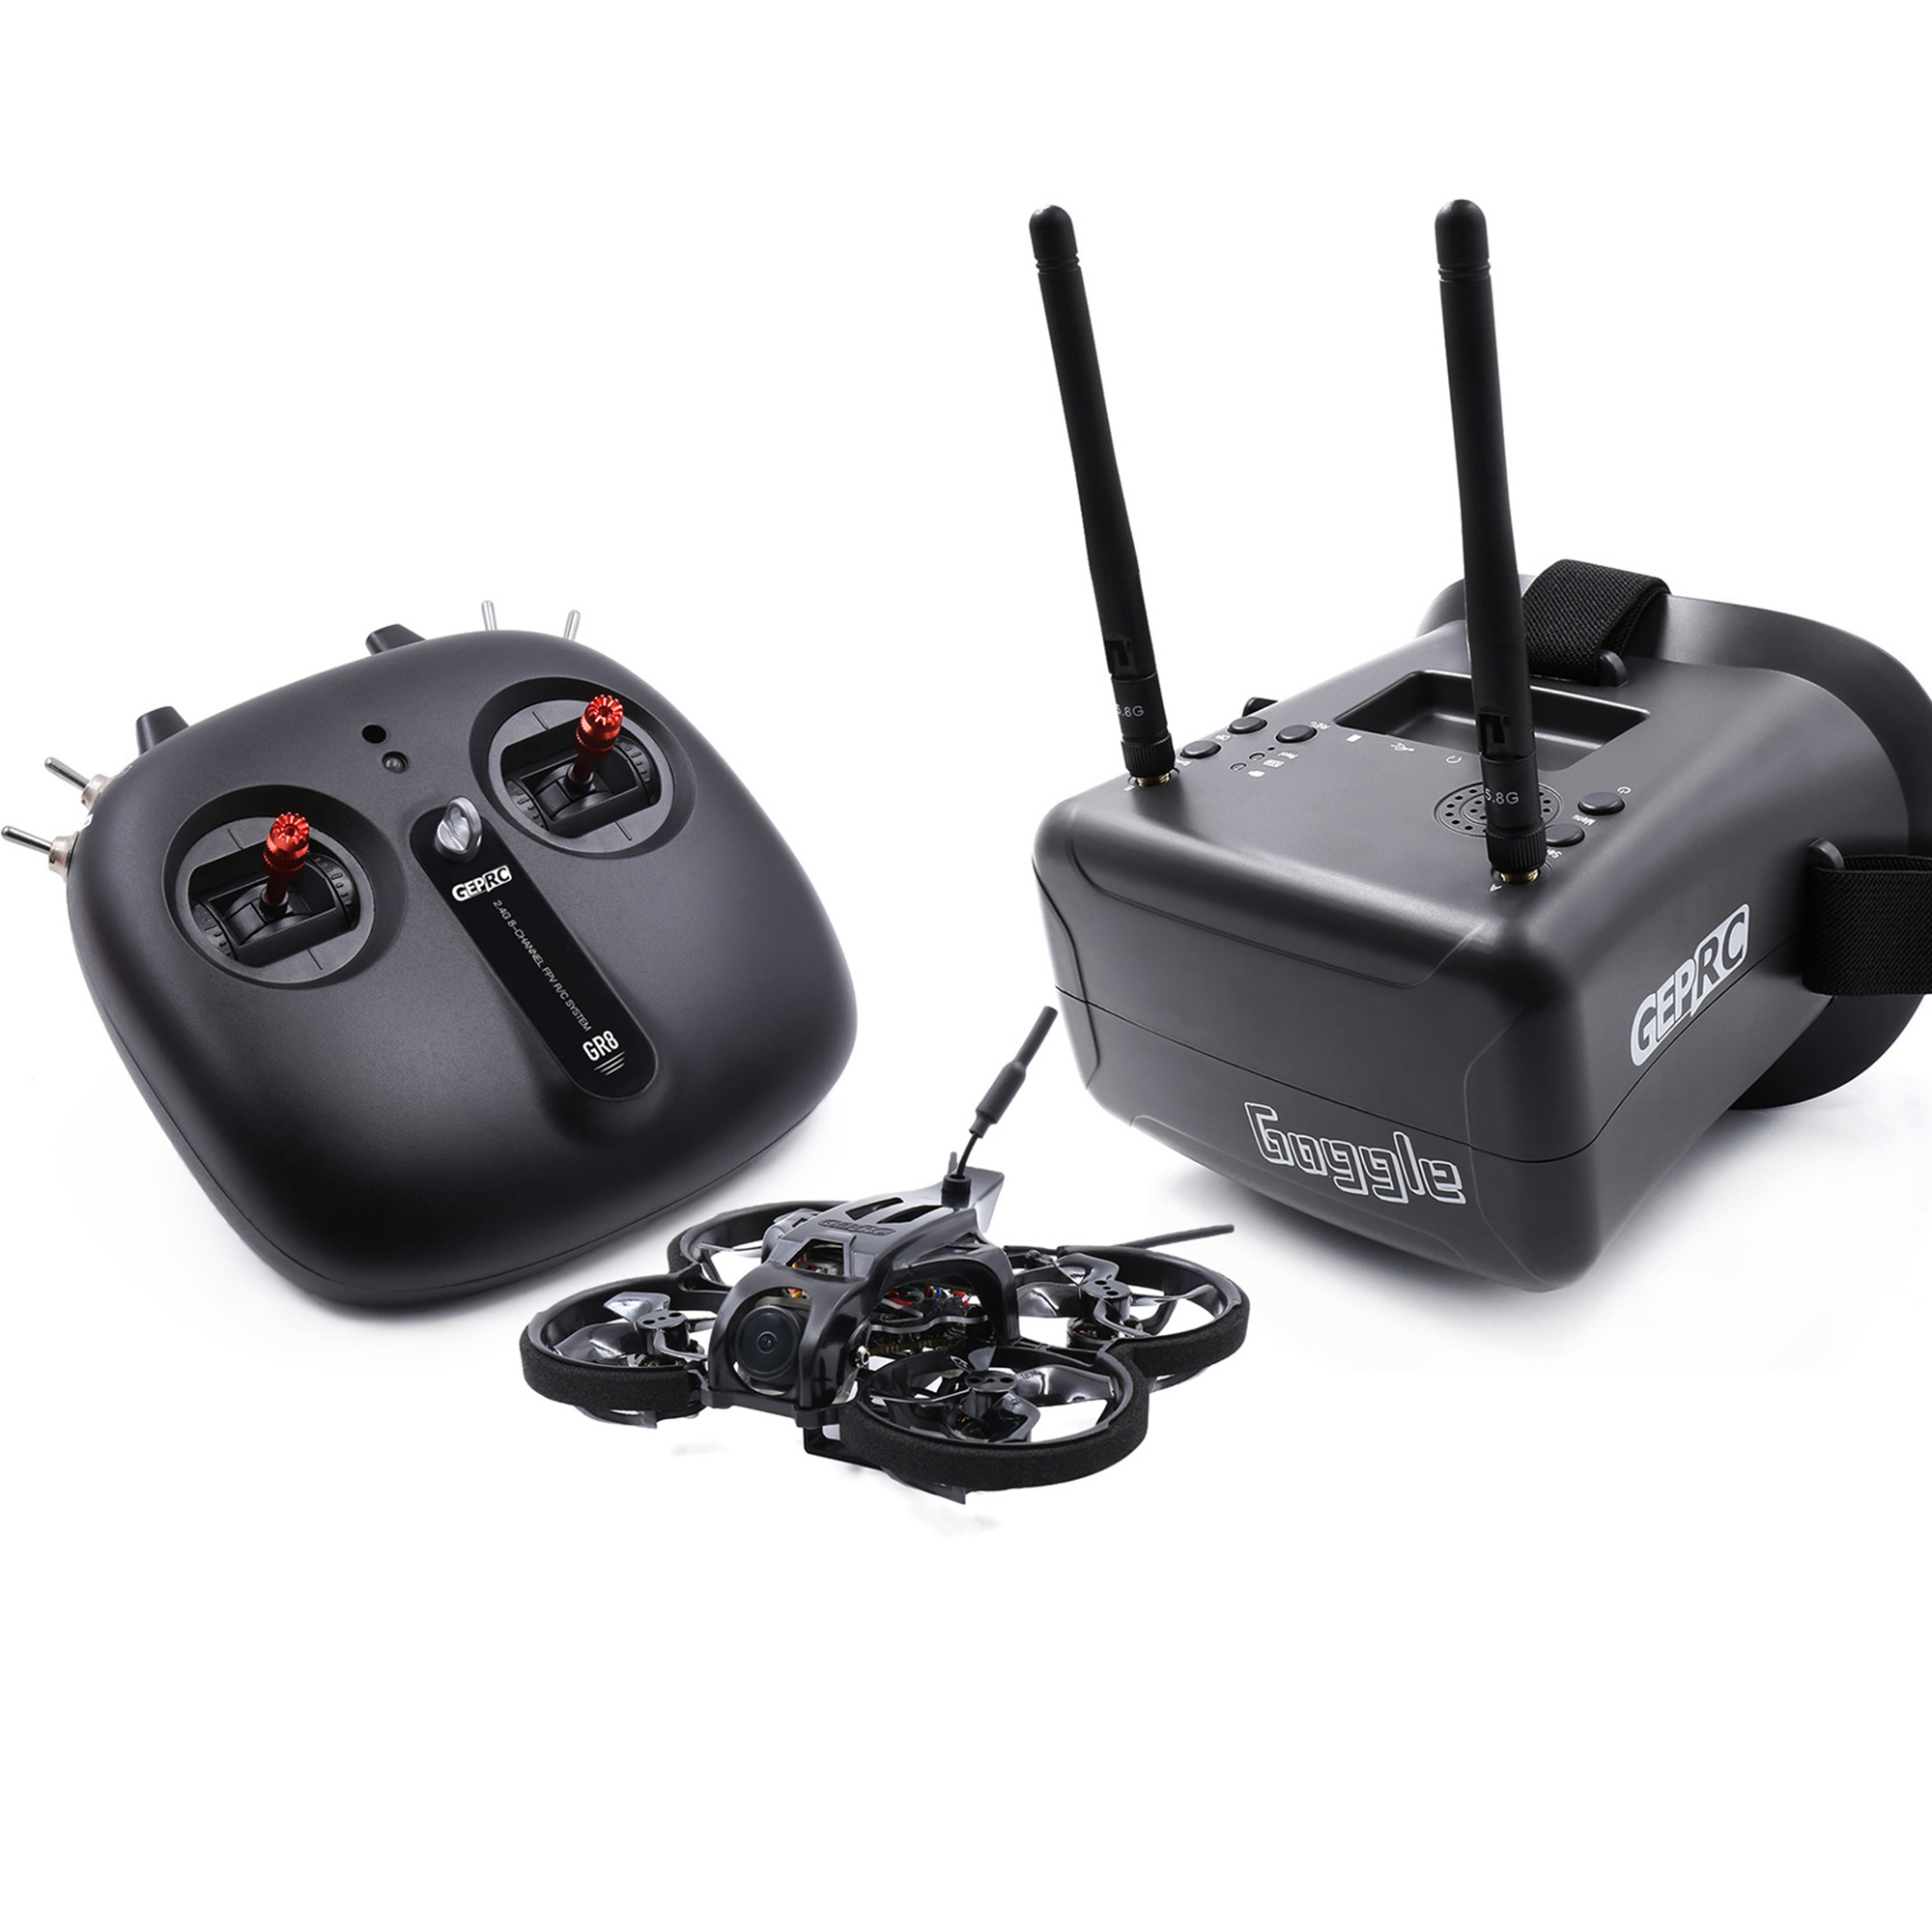 GEPRC-TinyGO-16inch-2S-FPV-Indoor-Whoop-Runcam-Nano2-GR8-Remote-ControllerRG1-Goggles-RTF-Ready-To-F-1788771-2